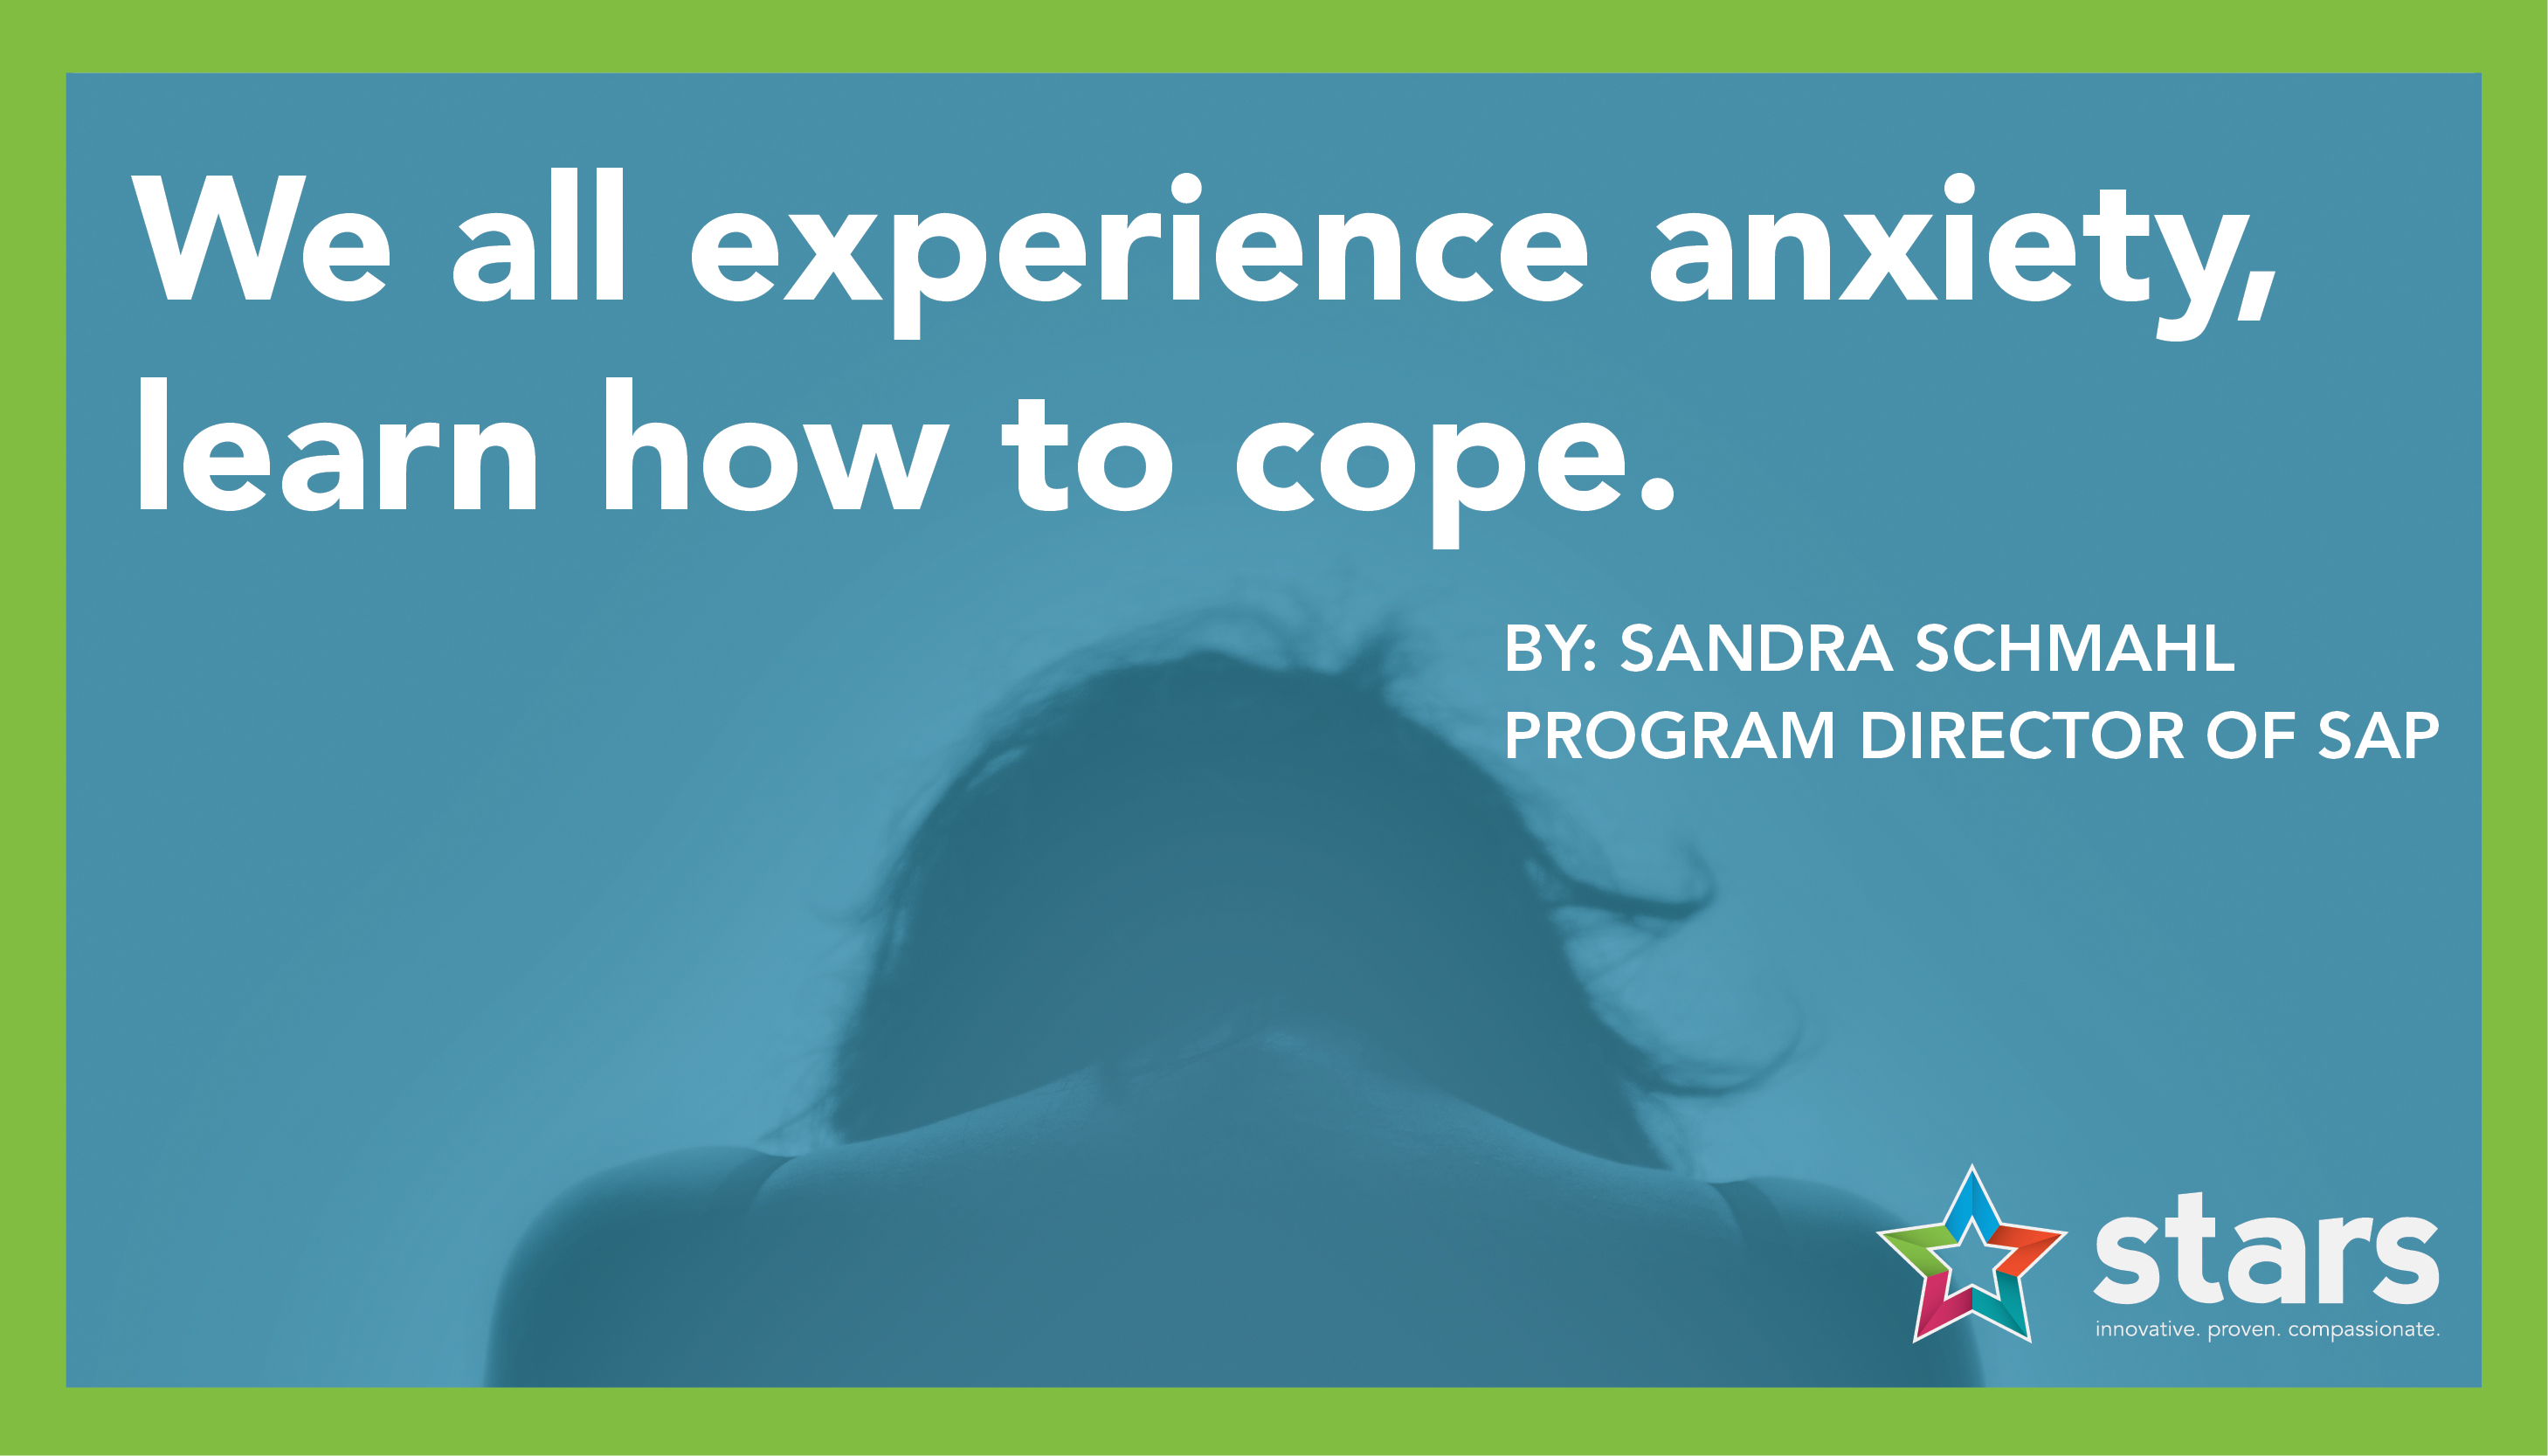 We all experience anxiety, learn how to cope.